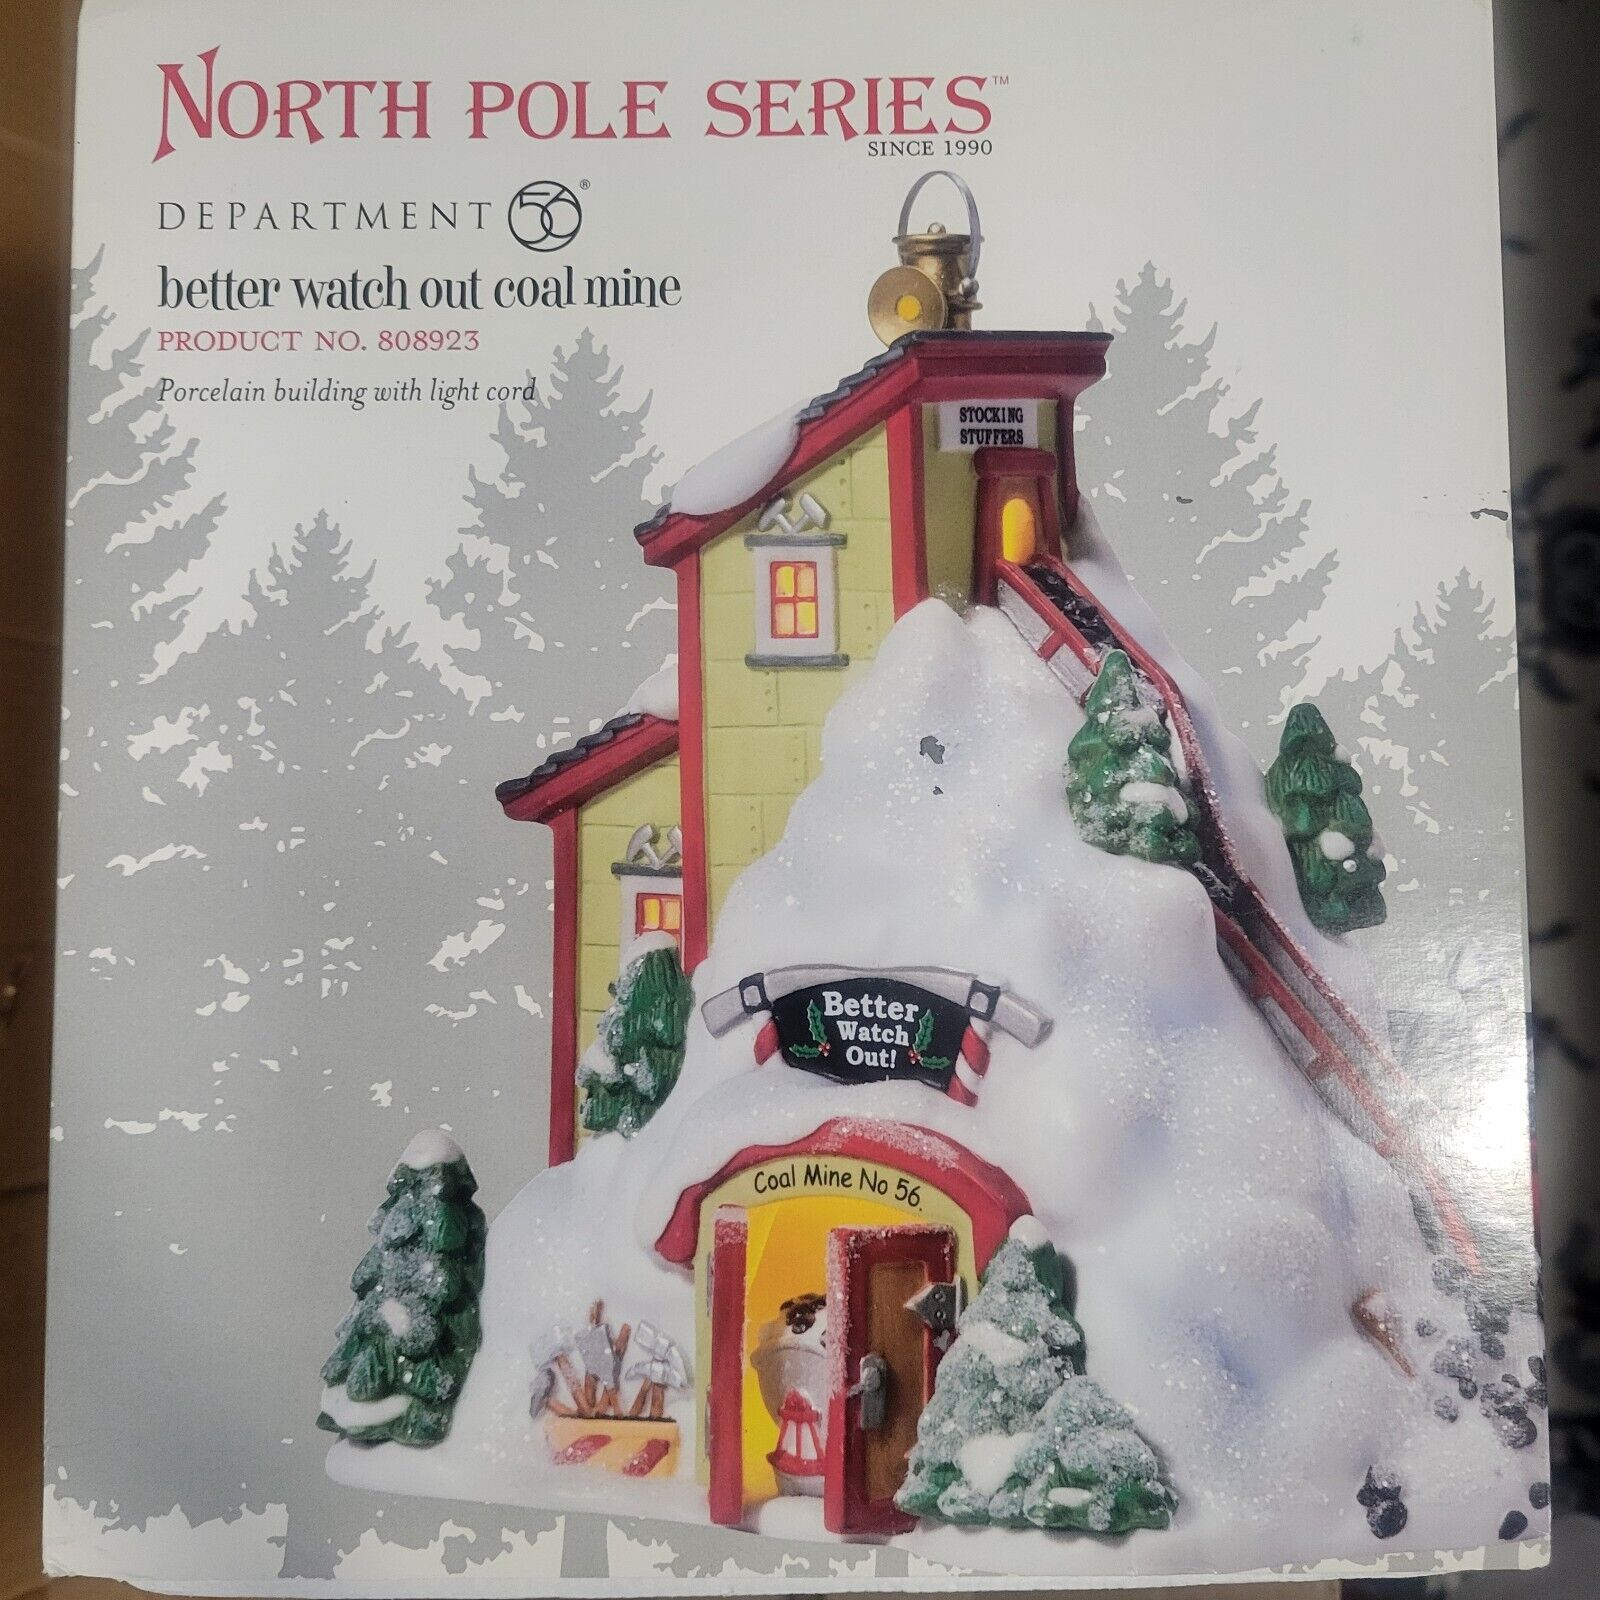 Department 56 808923 Better Watch Out Coal Mine No 56 North Pole Series Retired